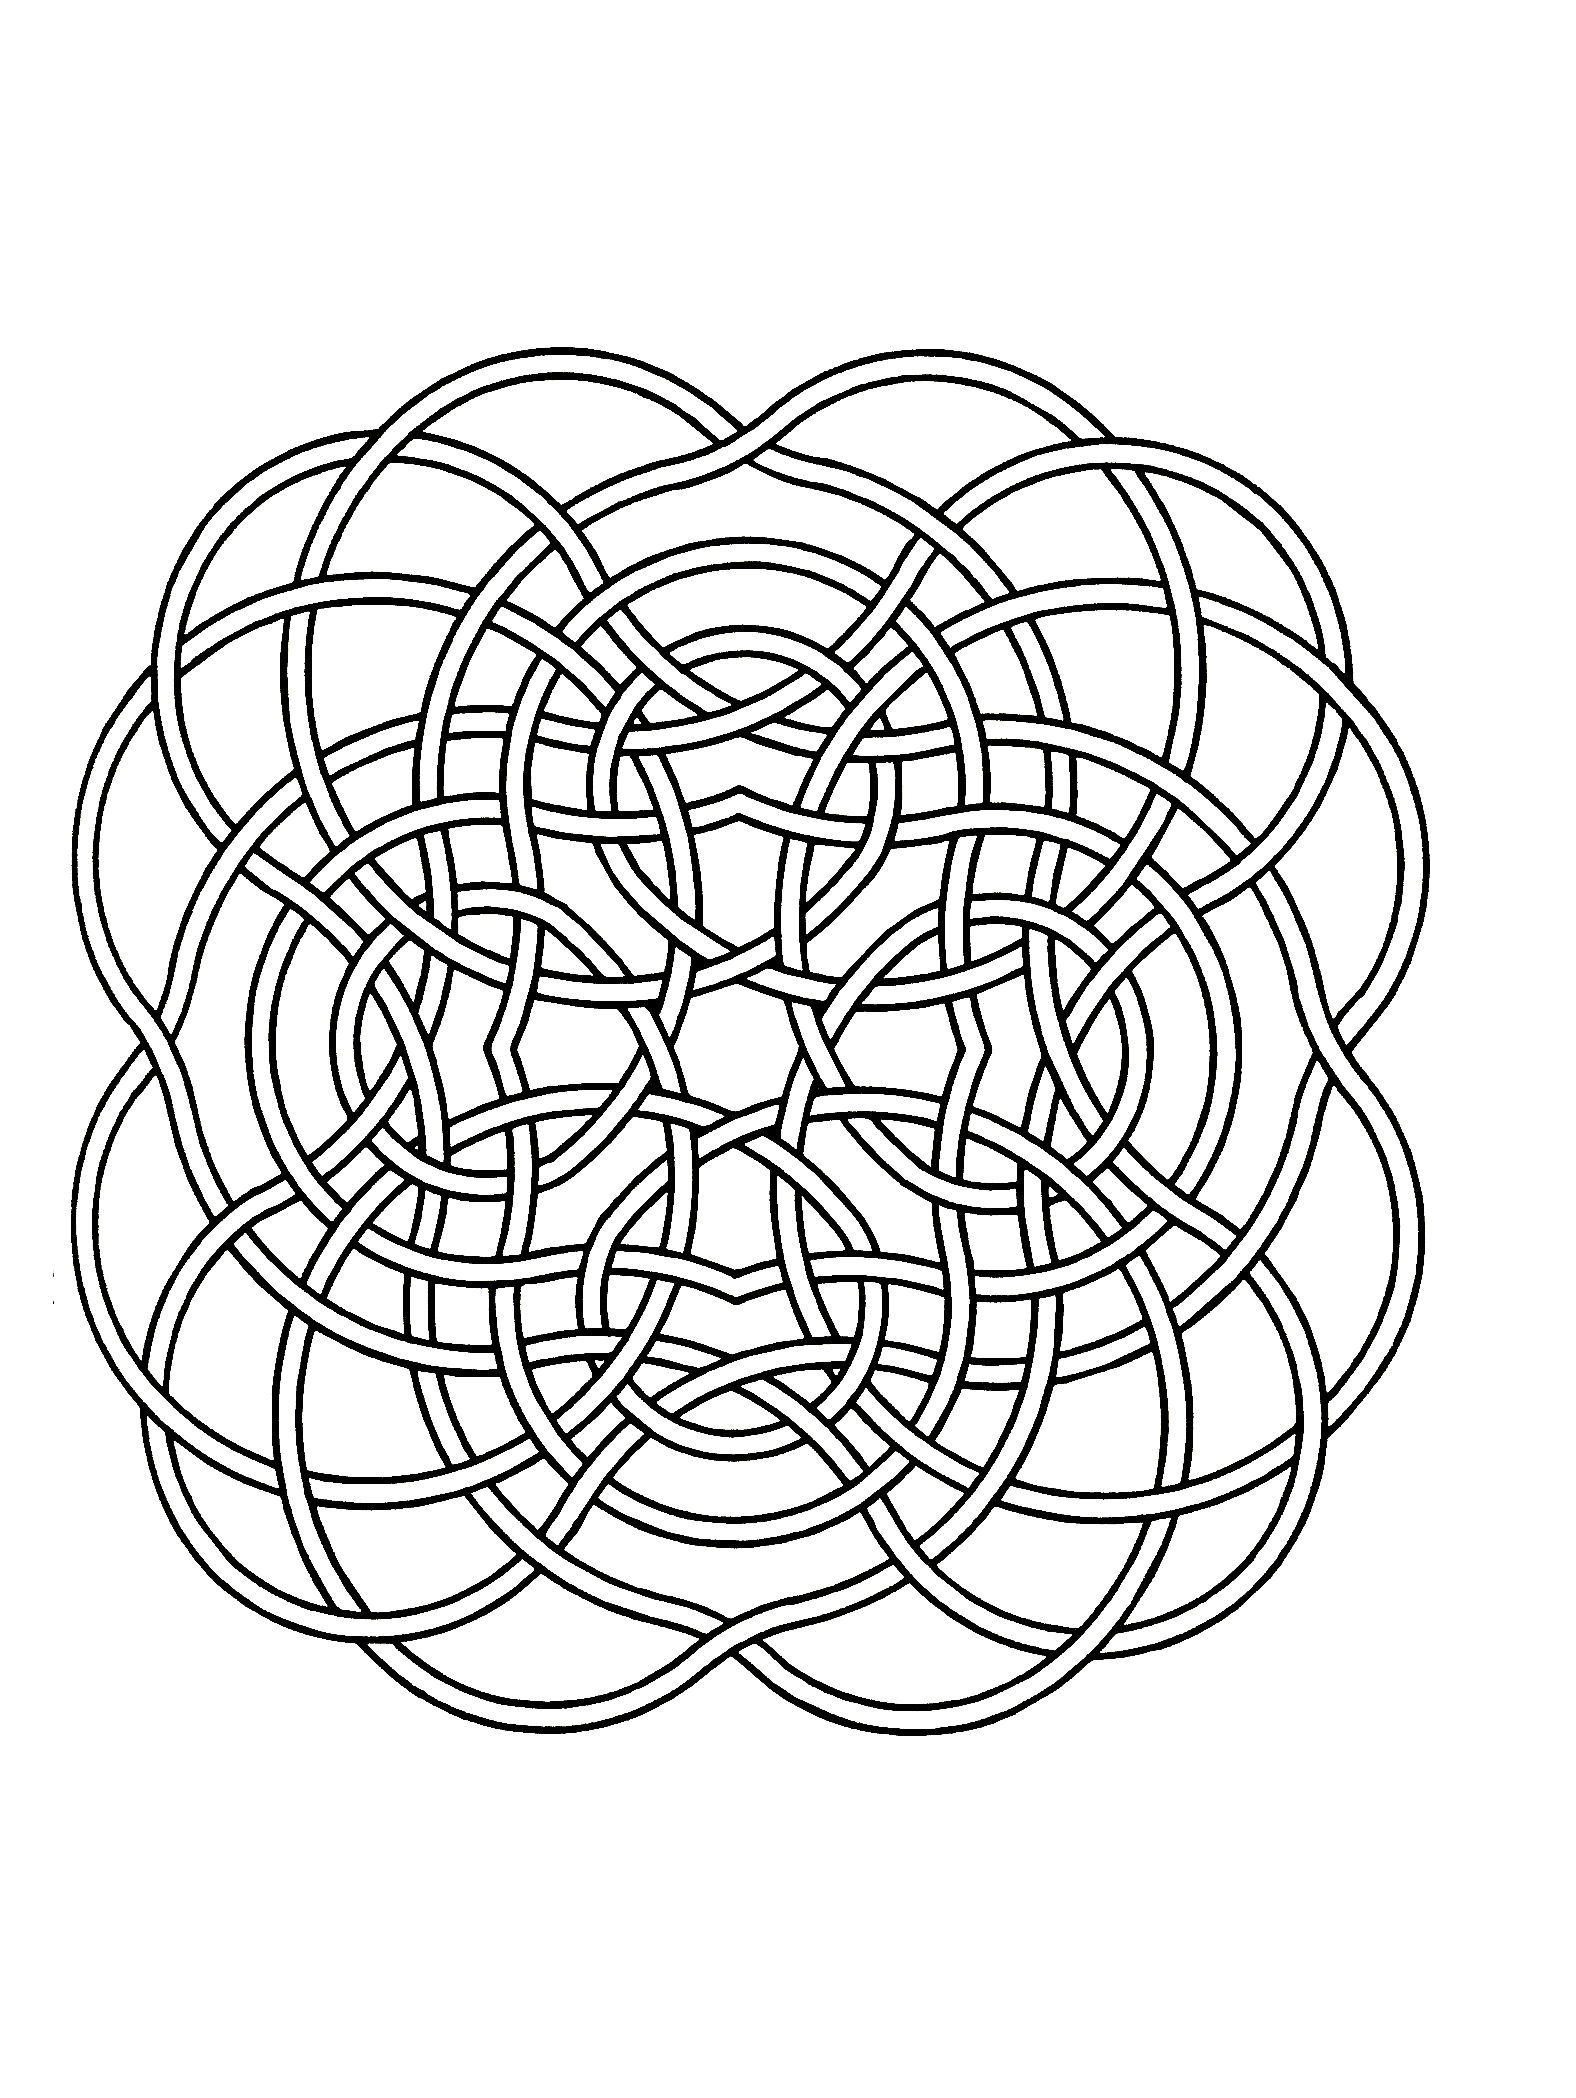 Mandala coloring page with fine ribbons